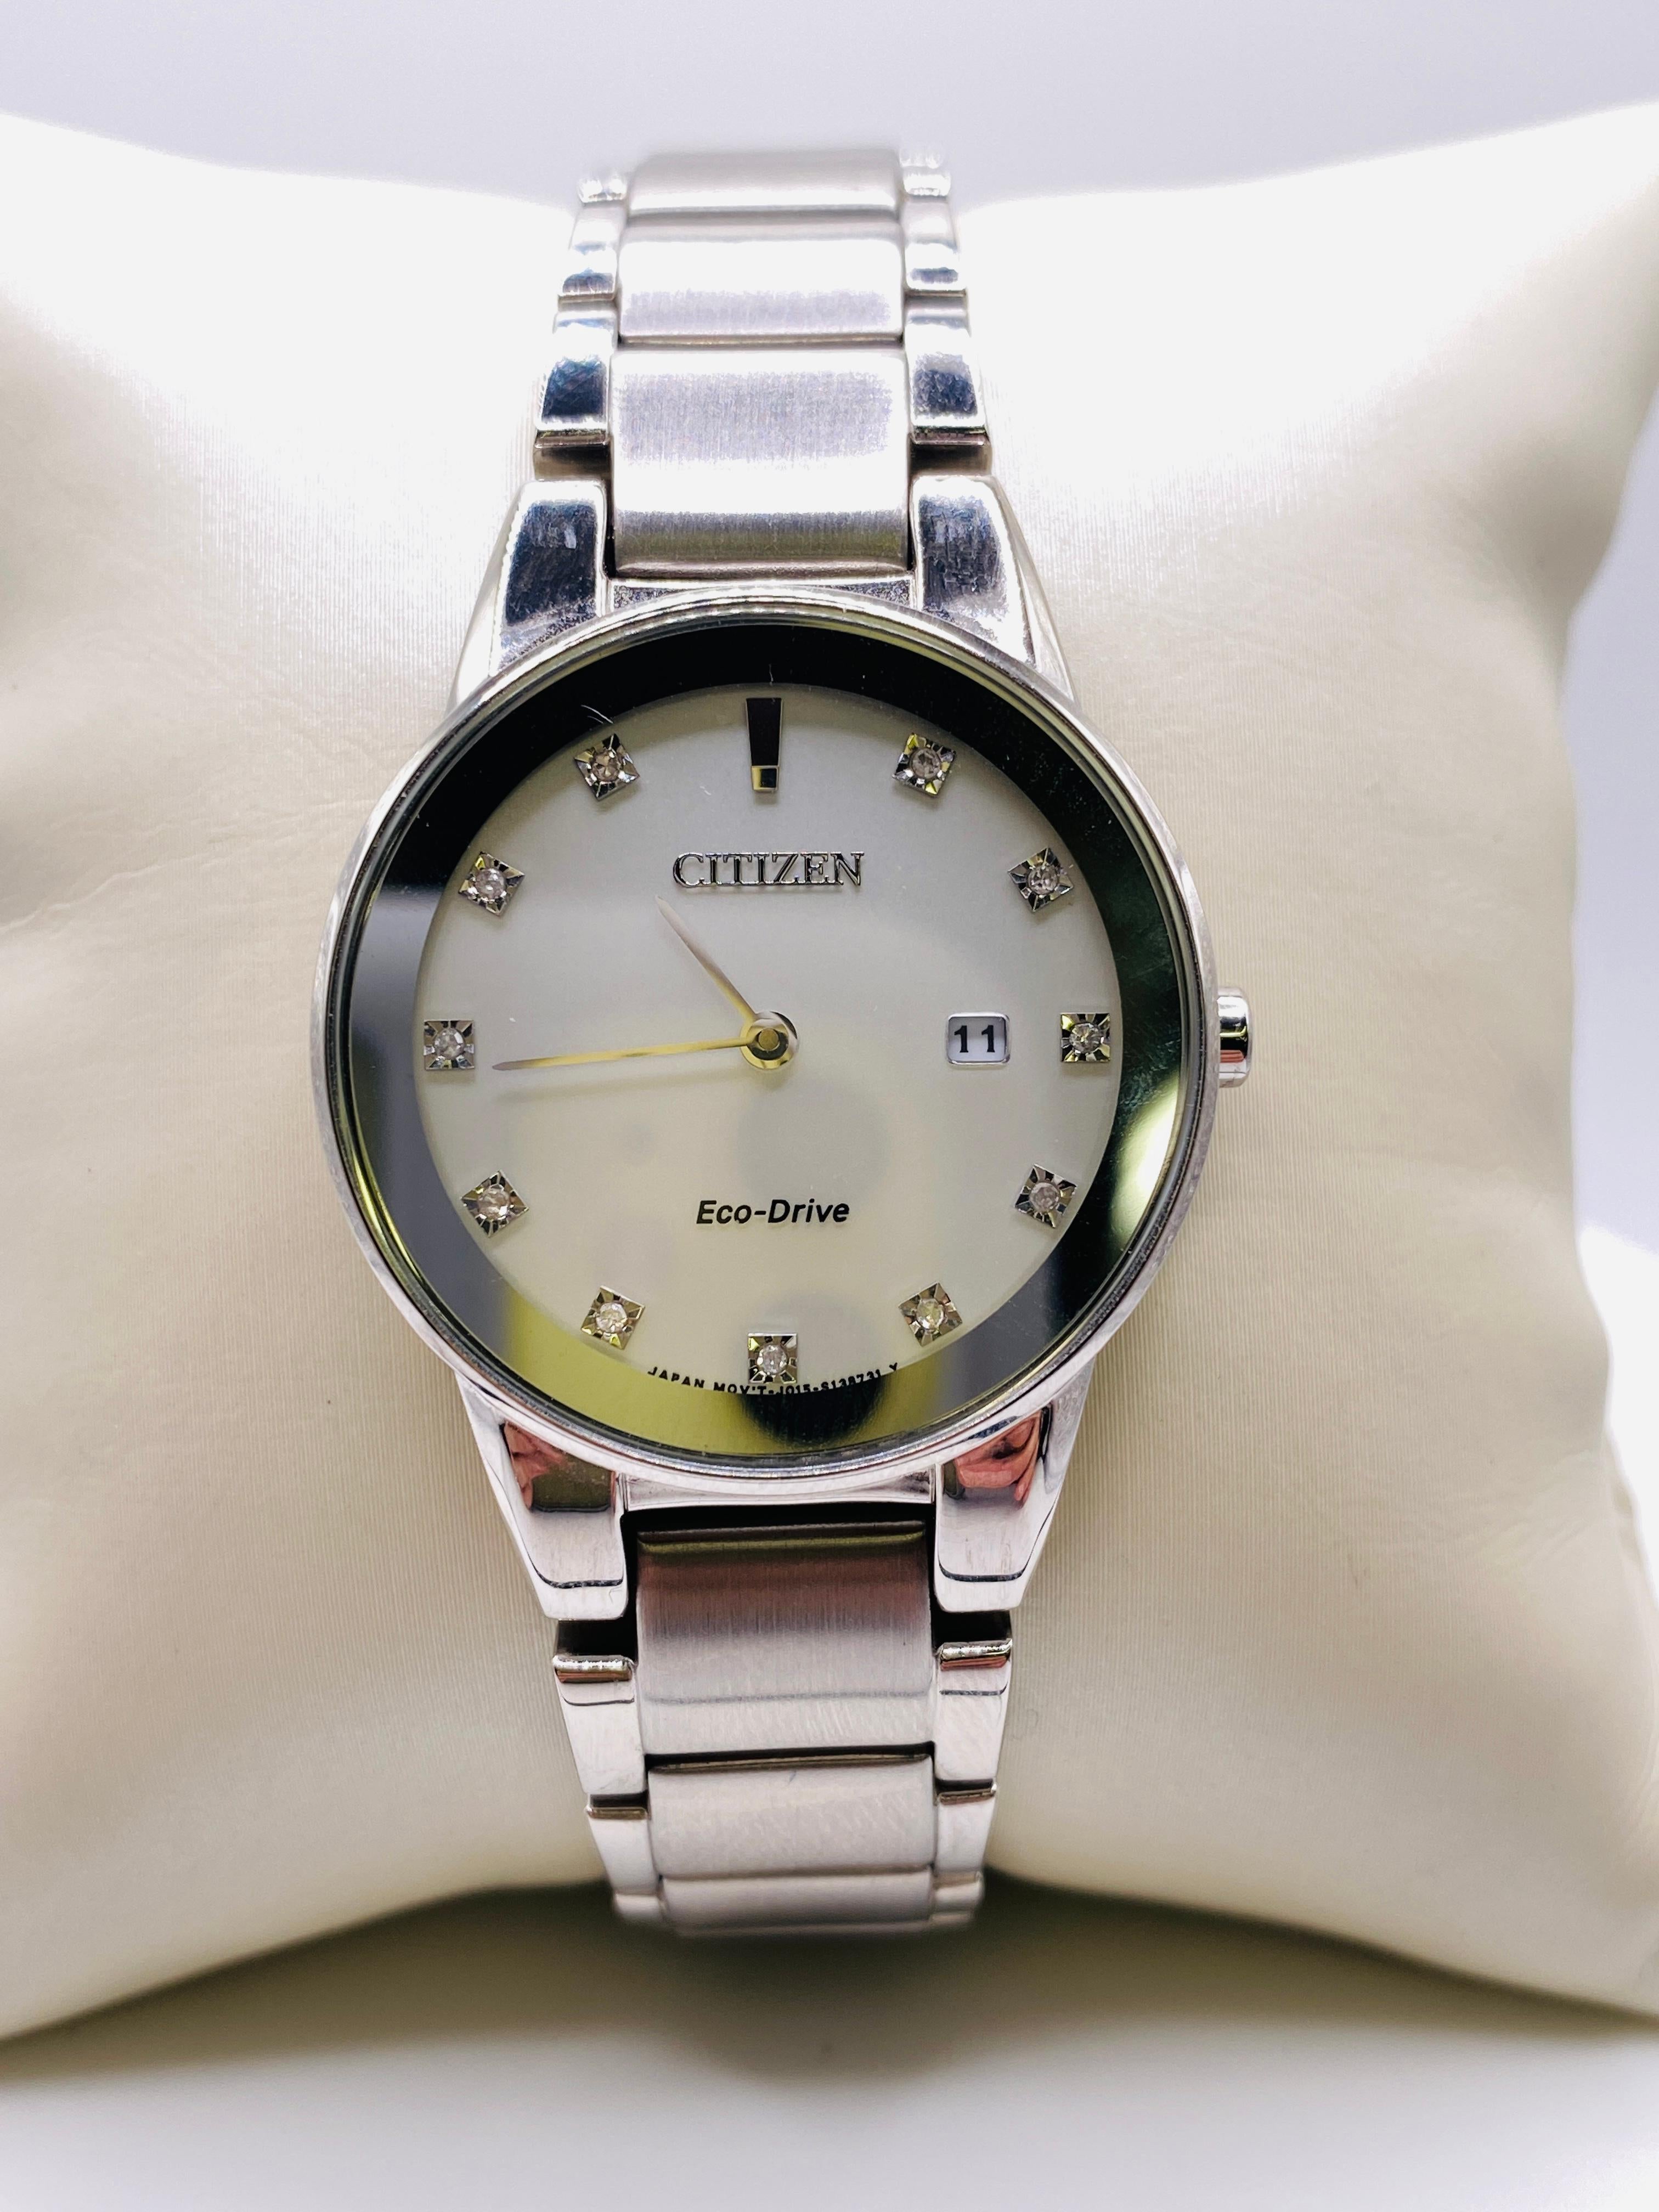 Citizen Eco Dirve Ladies Stainless Steel Watch with Crystal Dial Markers. Caliber J015, mineral crystal, silver dial, analog display, crystal on dial markers, date display, water resistant to 30m. Japanese Movement. Model J015-S095921, Serial